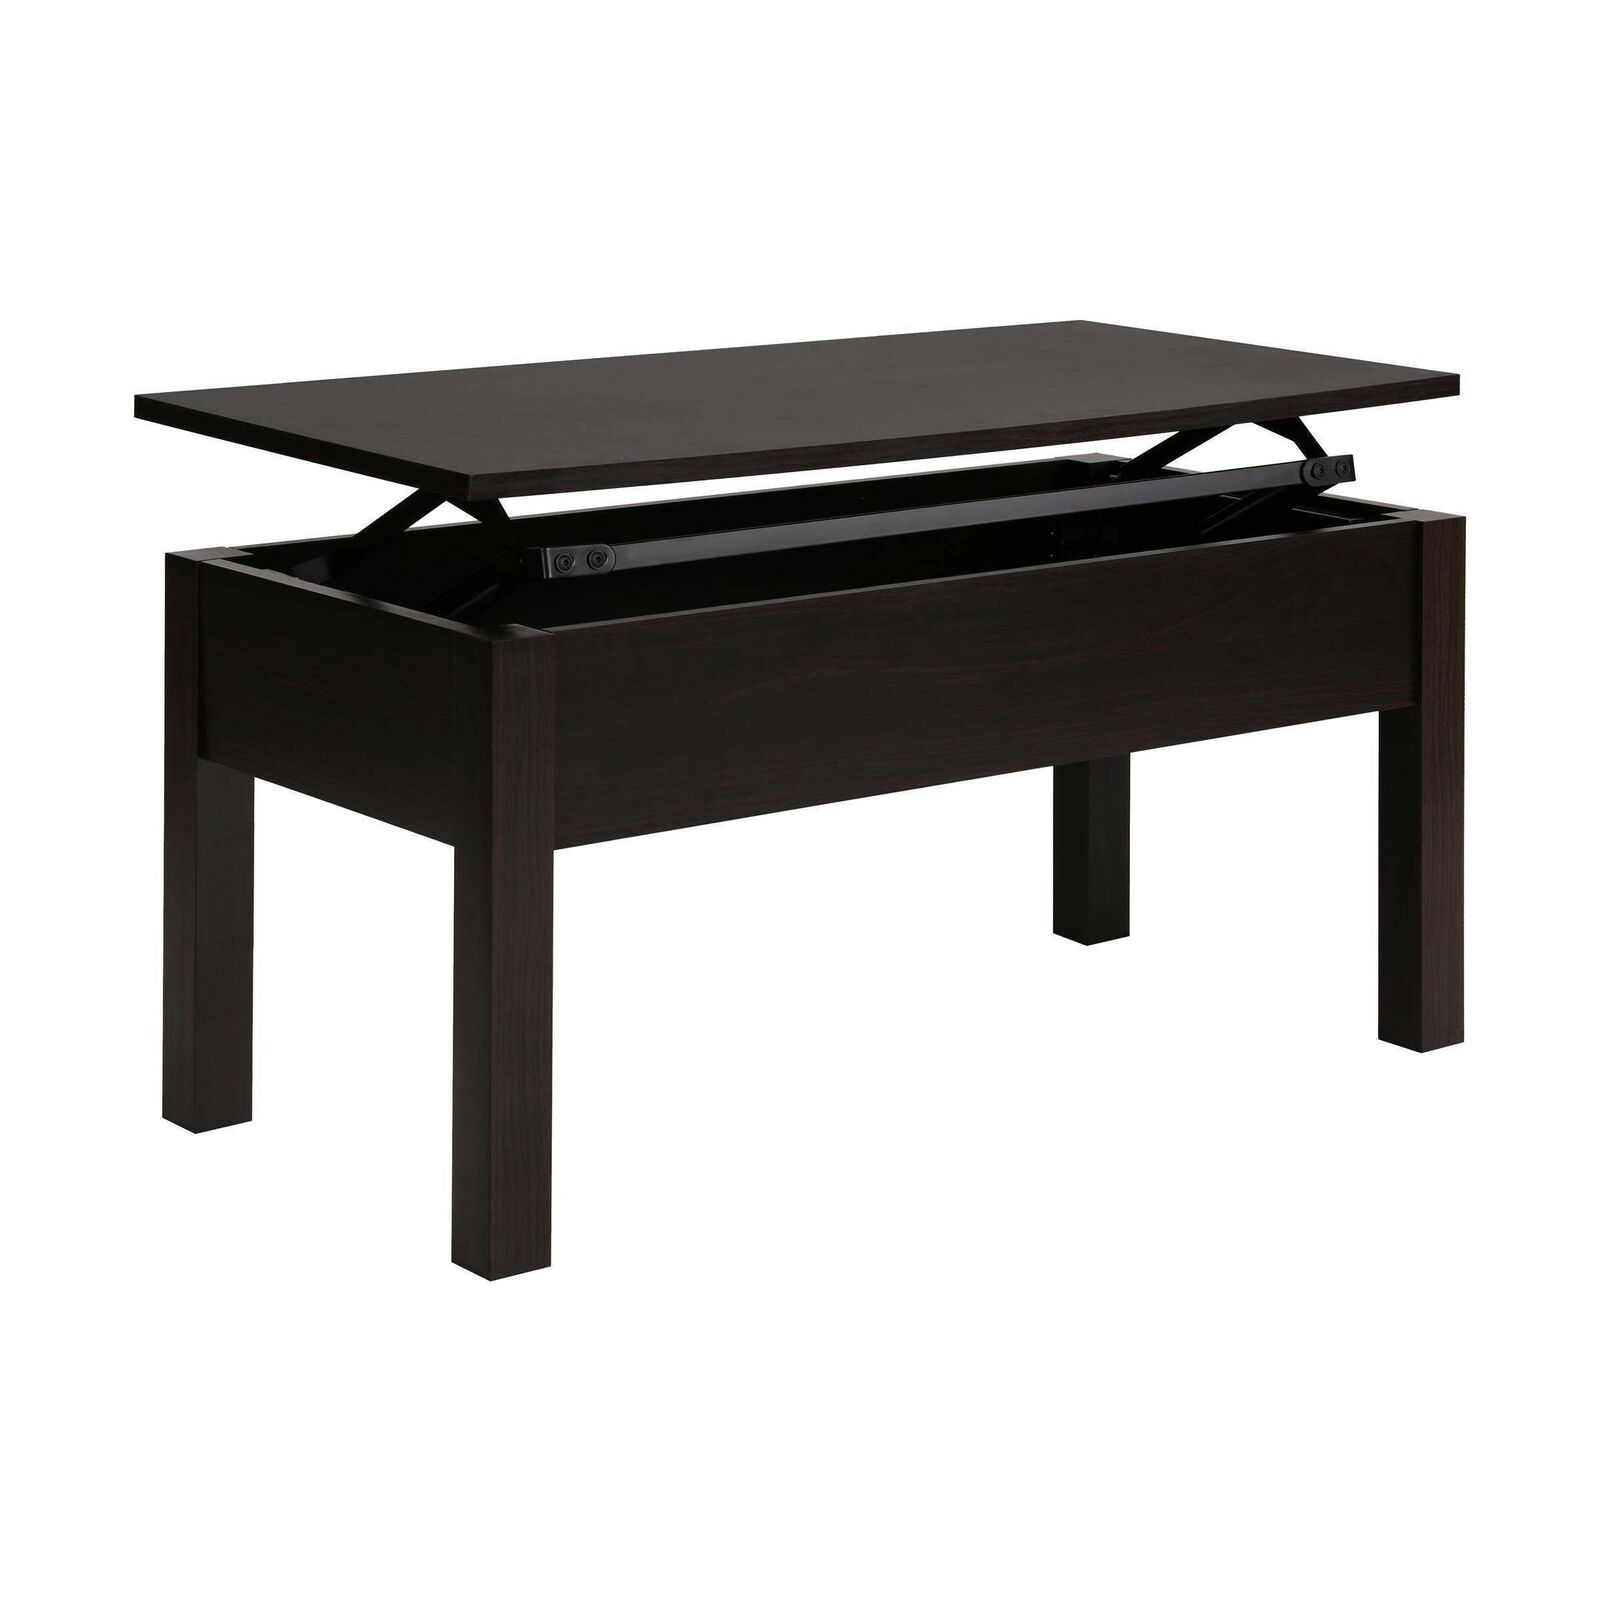 mainstays lift top coffee table espresso for end ashley furniture wilcot sofa can you spray paint finished wood black accent liberty youth royal emmaus crafts made out pallets